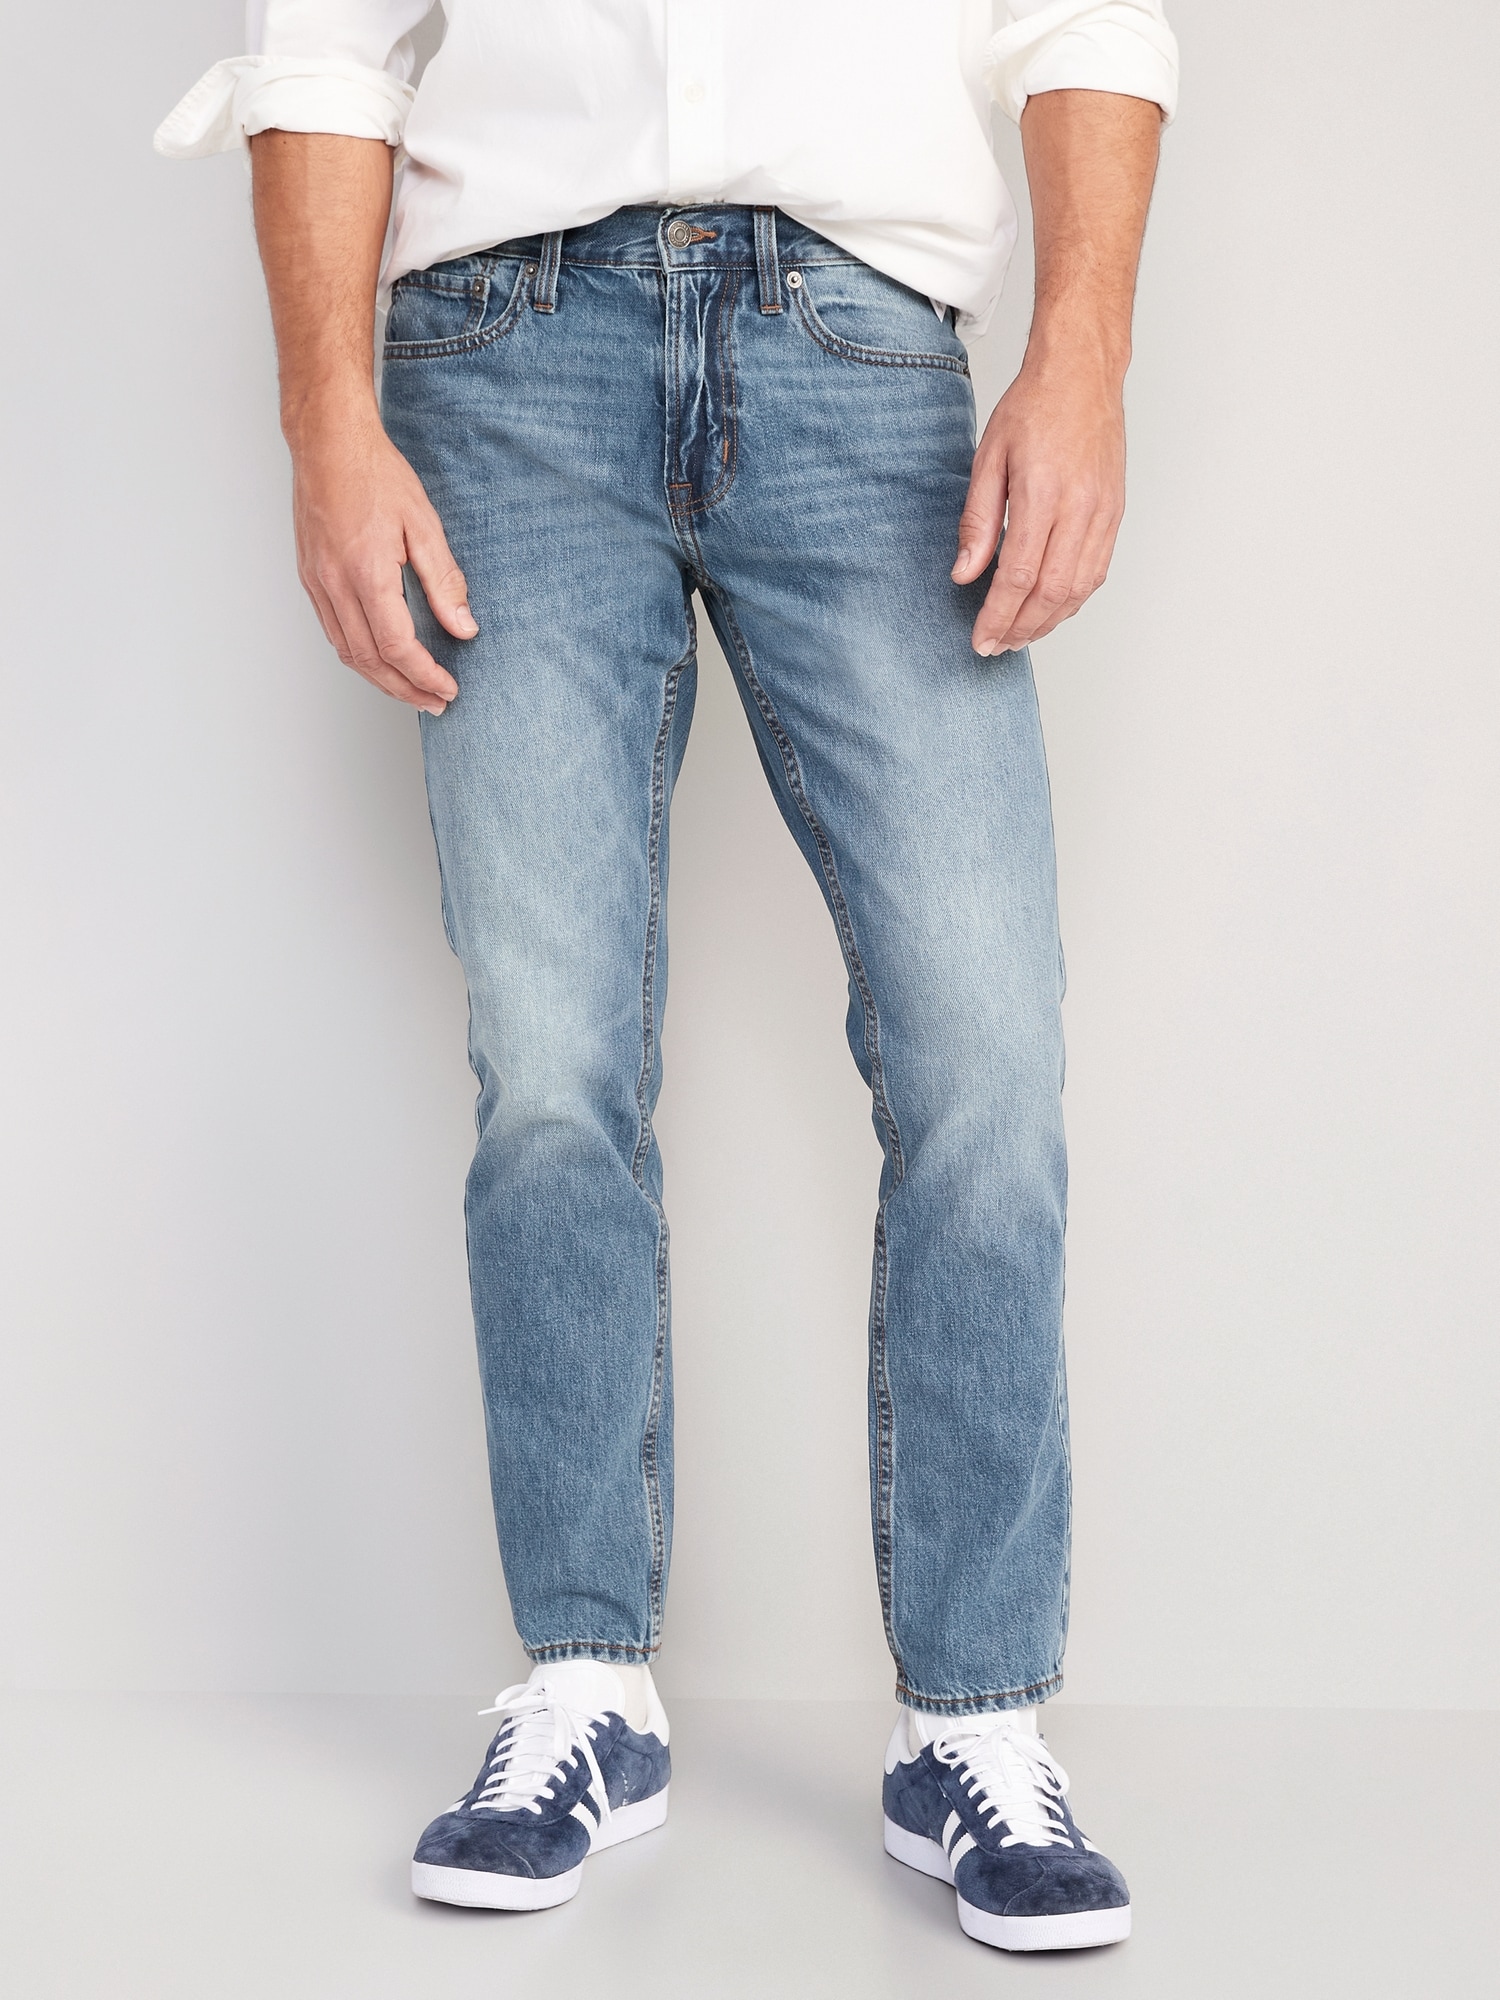 Wow Slim Non-Stretch Jeans for Men